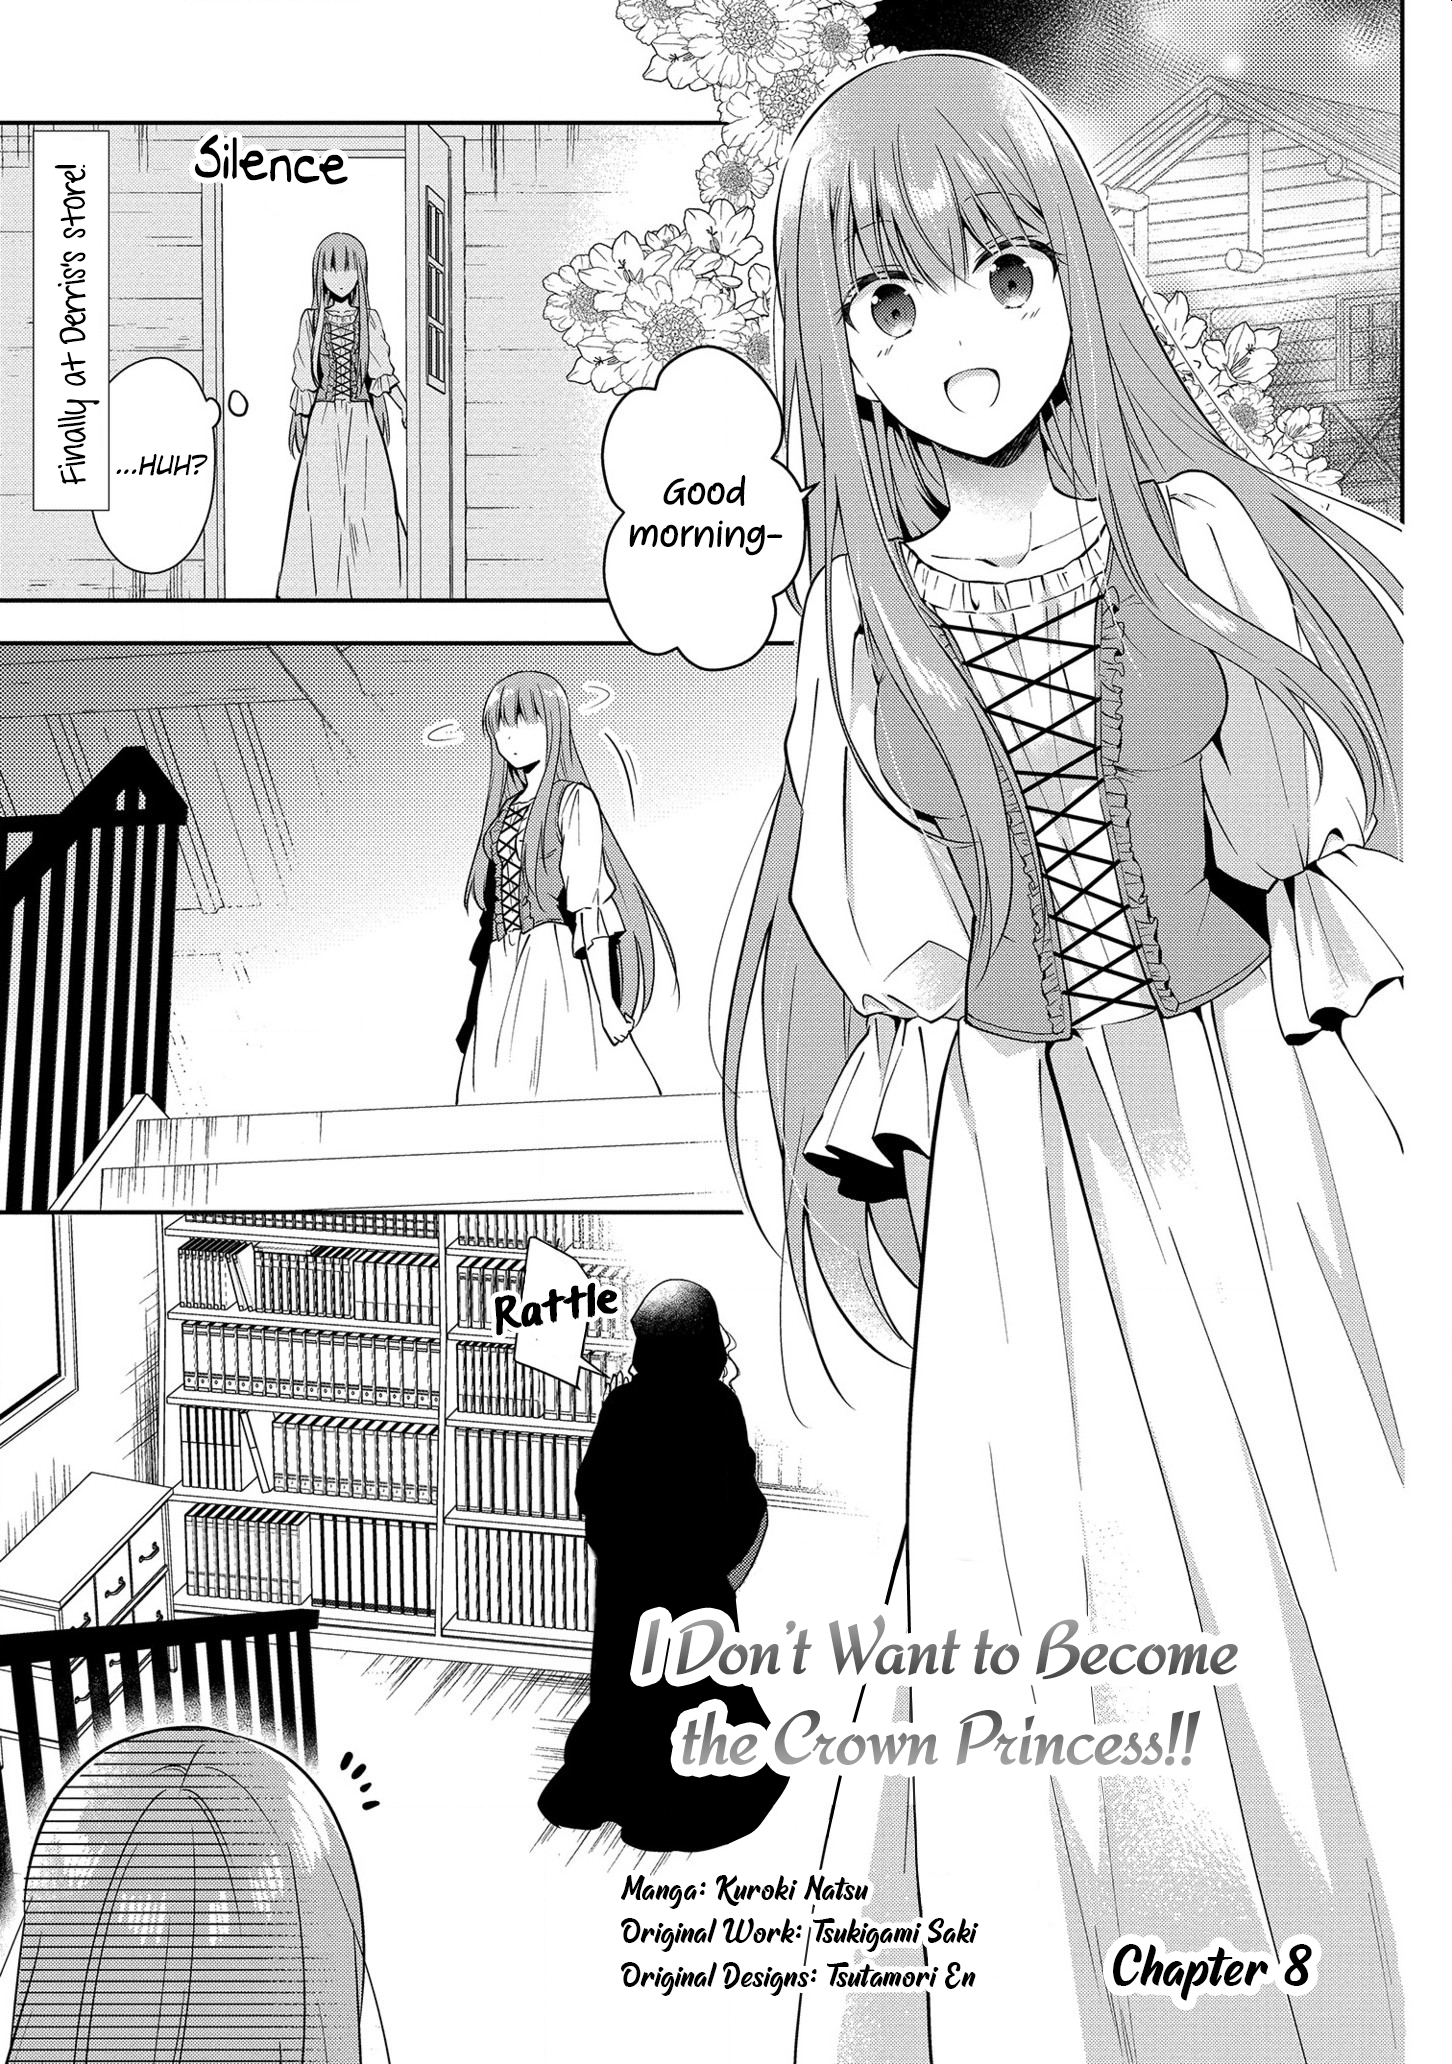 I Don't Want To Become Crown Princess!! - Page 1